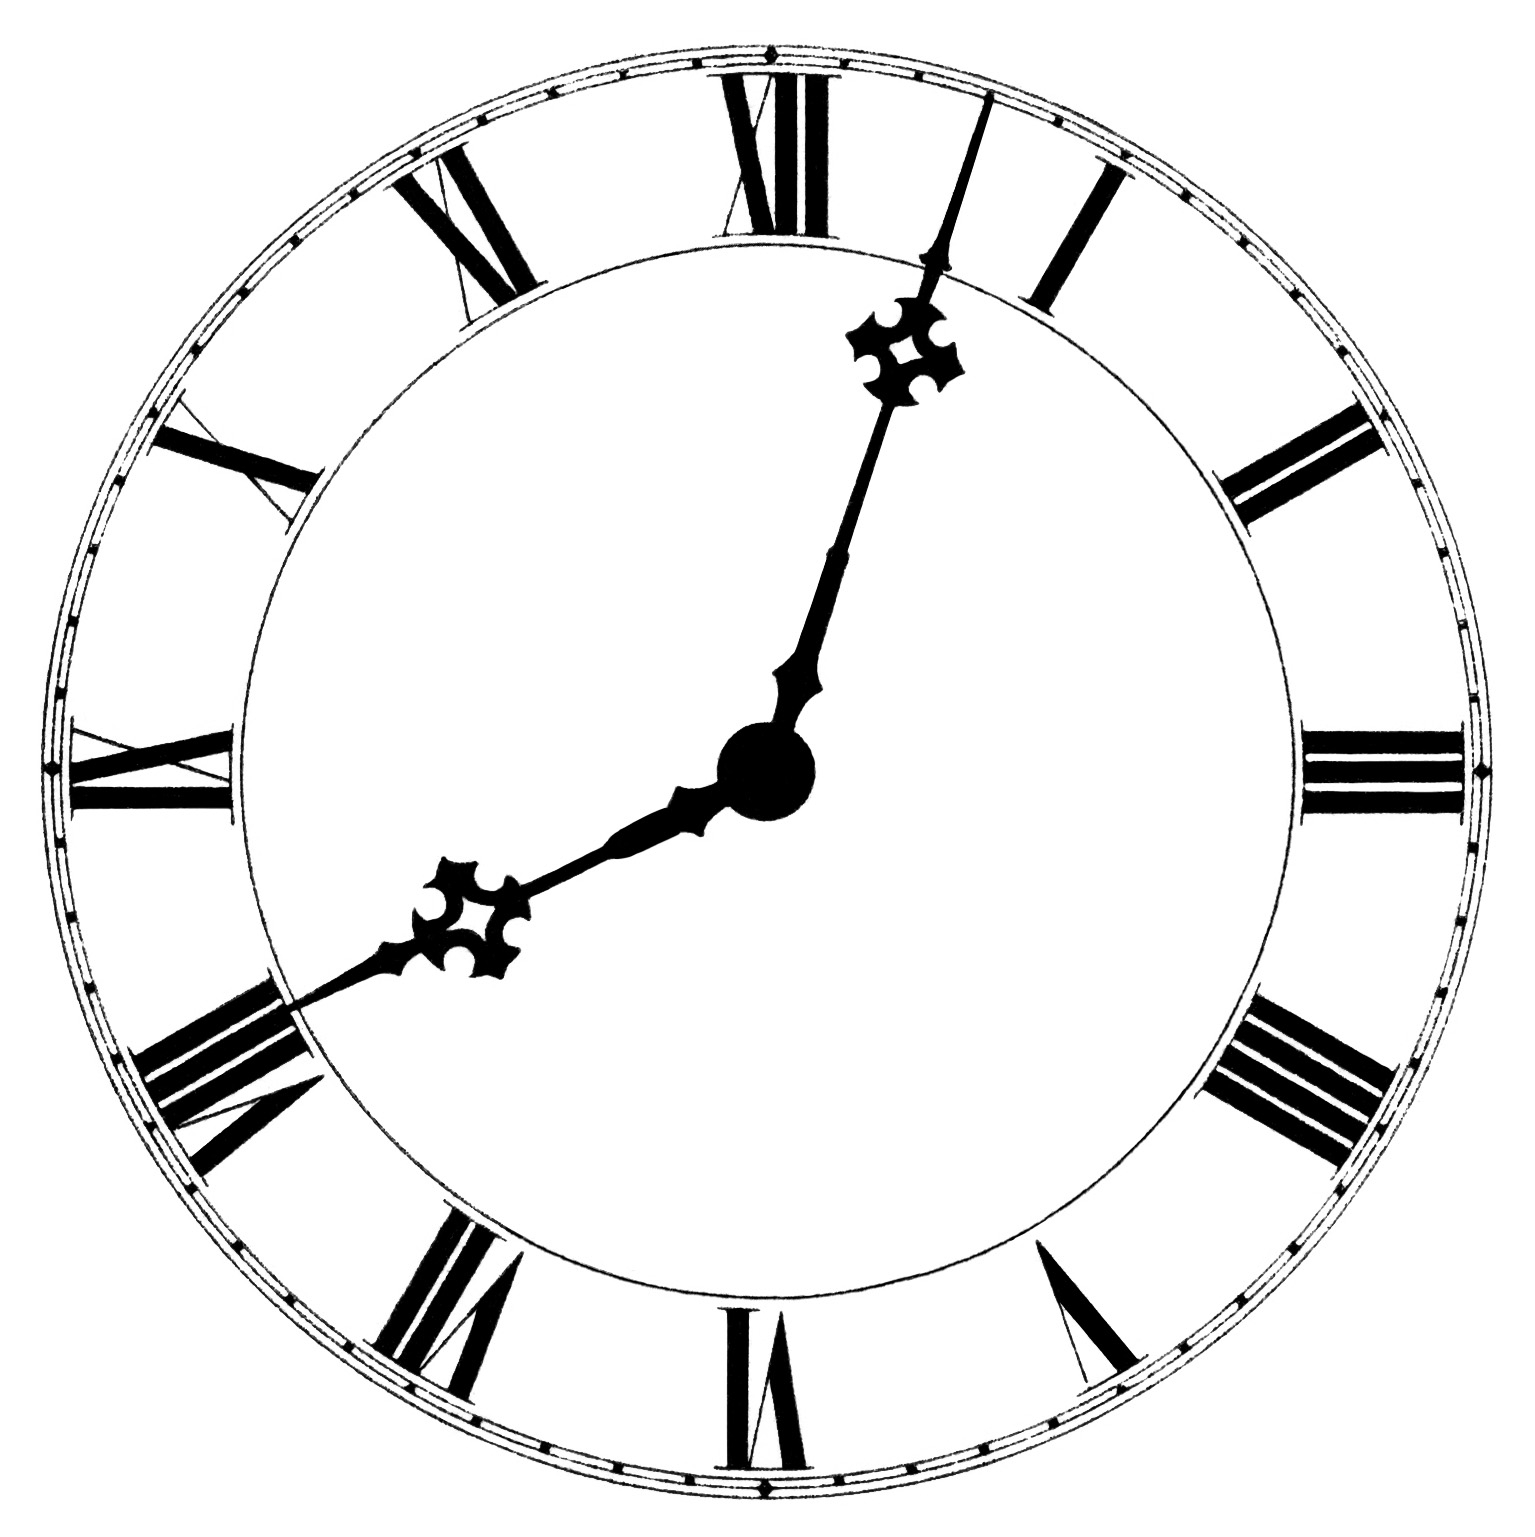 Clock face images.